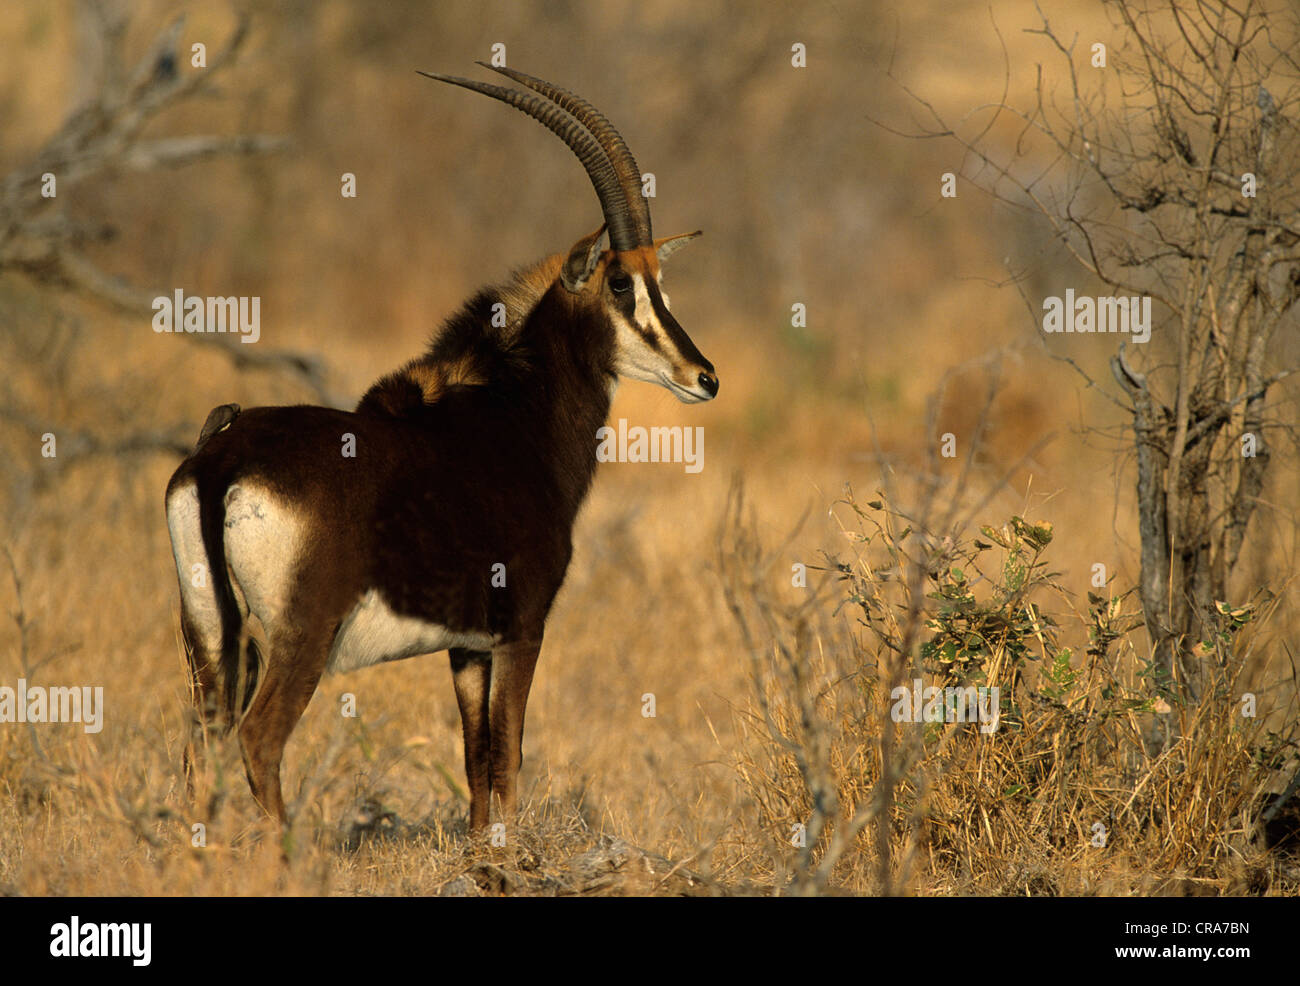 Sable Antelope (Hippotragus niger), Kruger National Park, South Africa, Africa Stock Photo